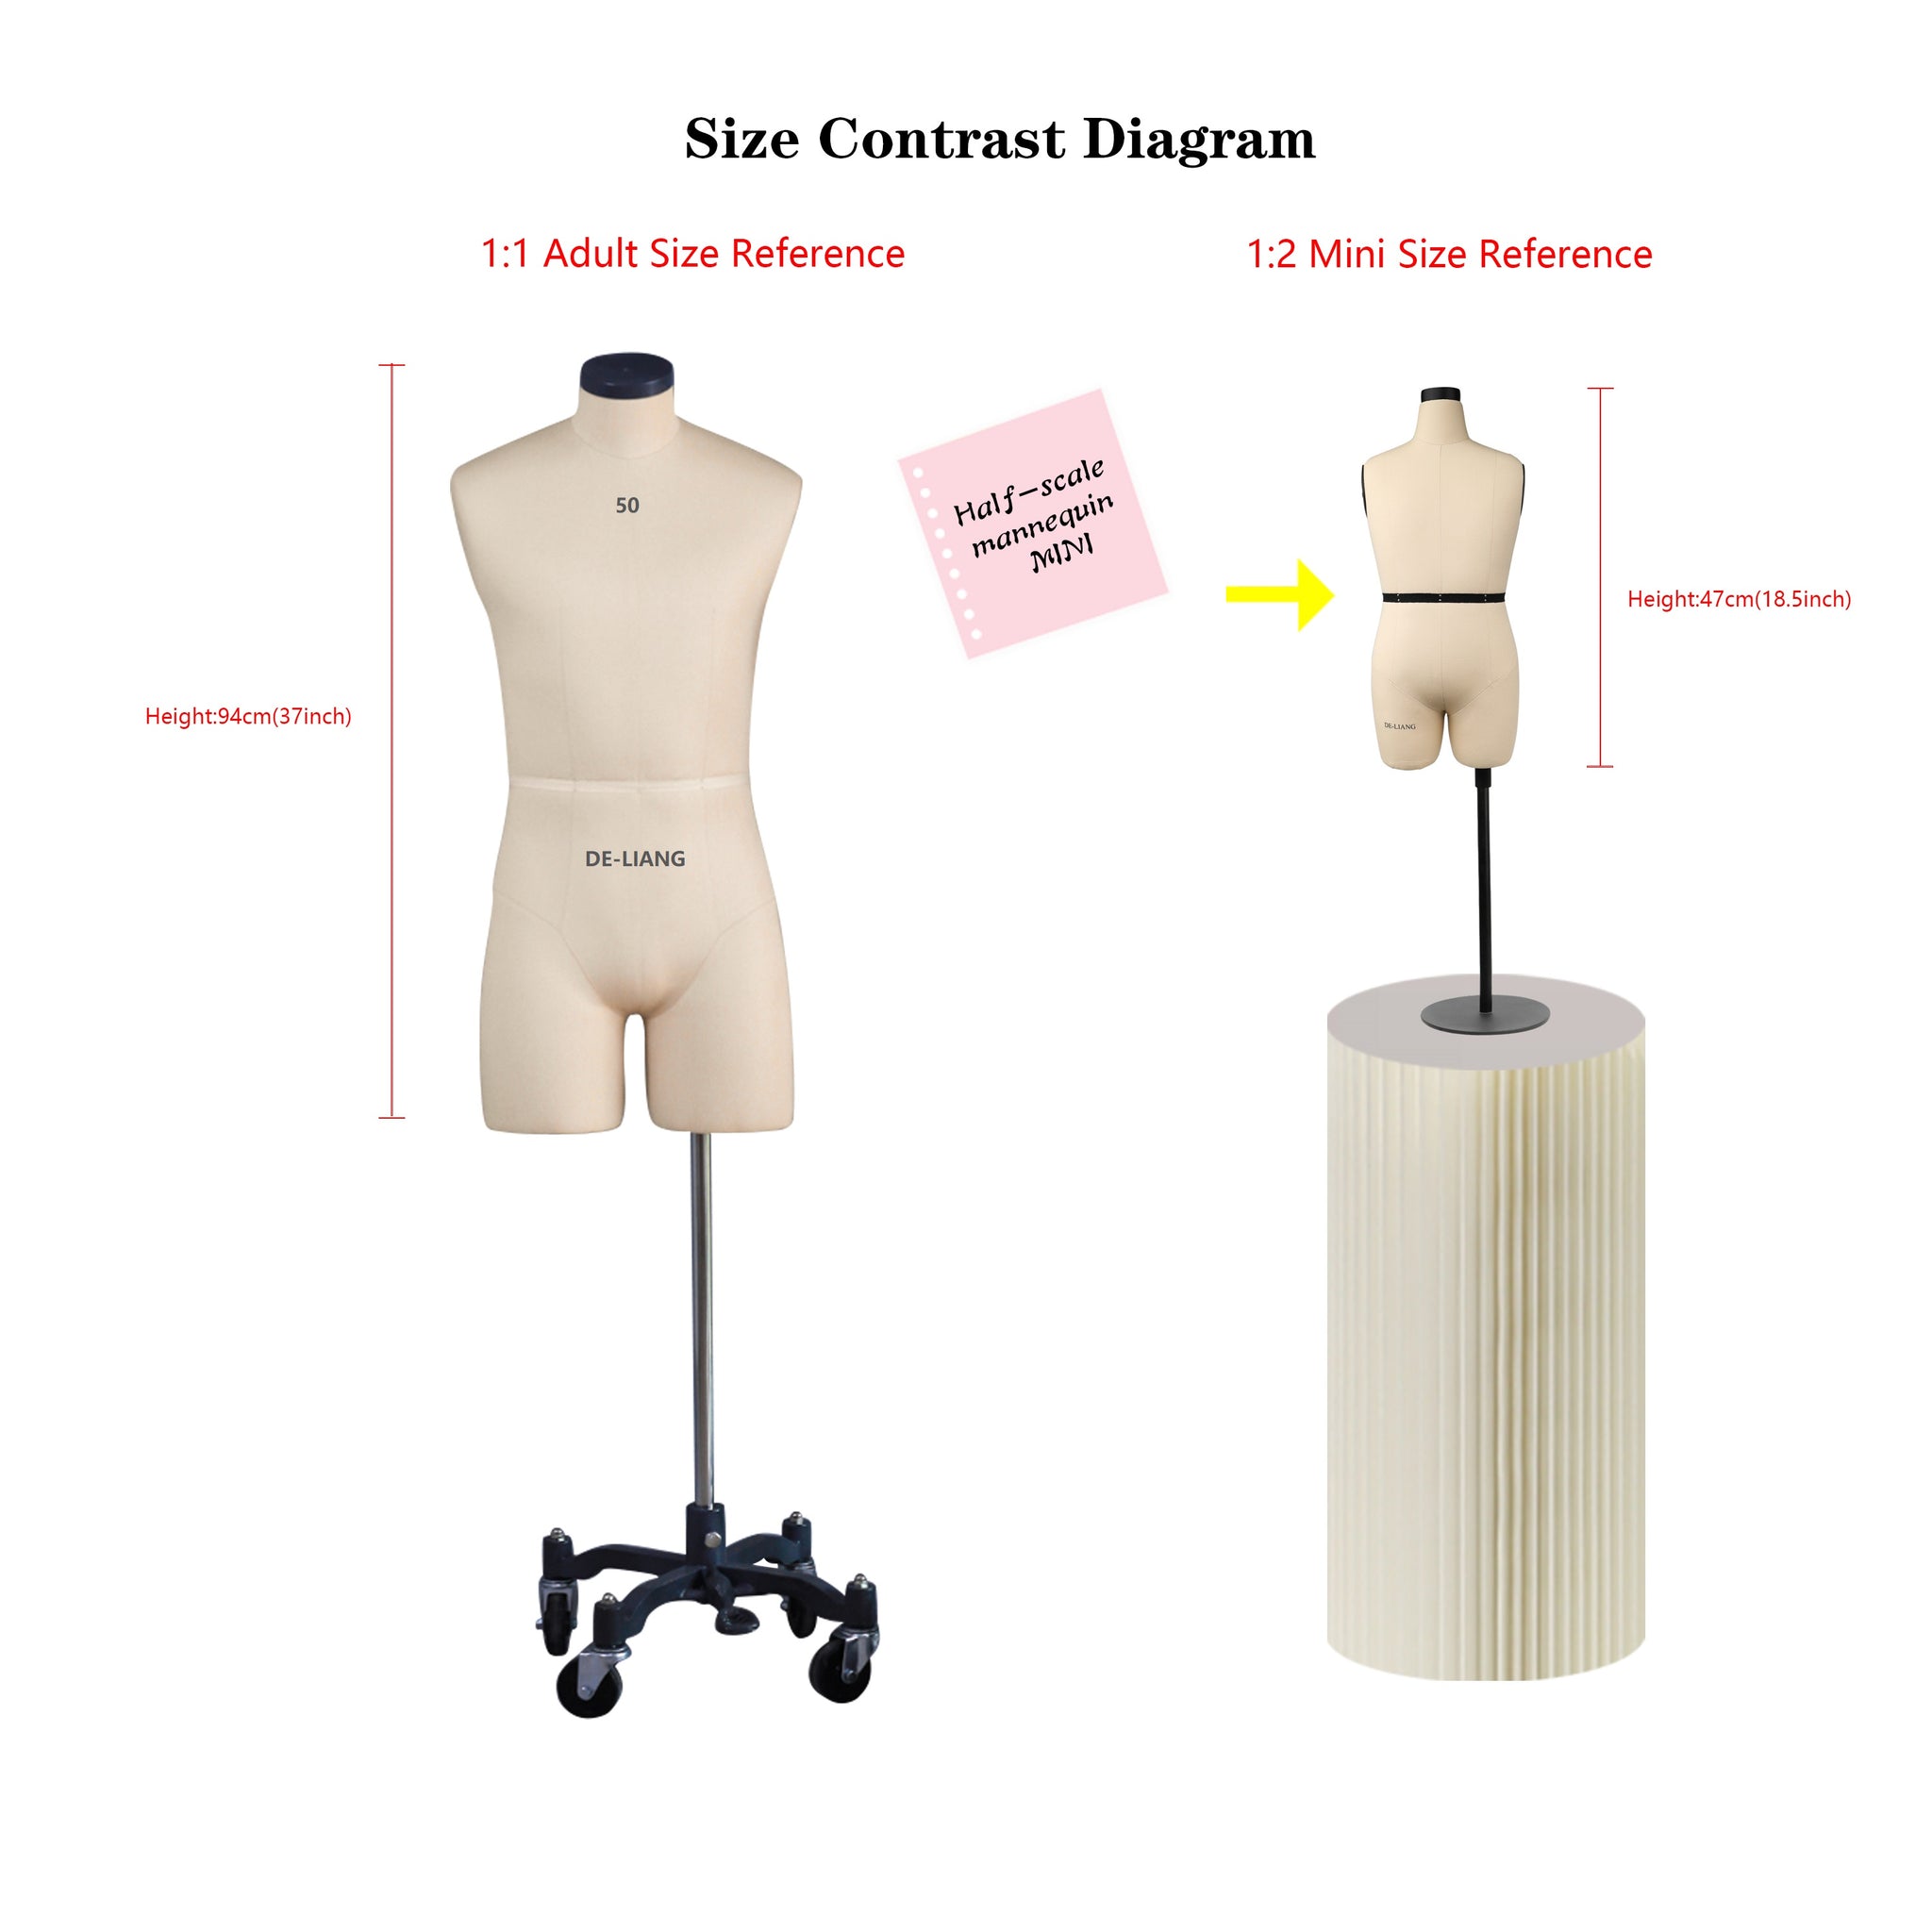 DL265 Half Scale dress form full body, US size 6 1/2 scale tailoring  dummy,Sewing Dressmaker Mannequin with Detachable Arms, De-Liang Dress  Forms